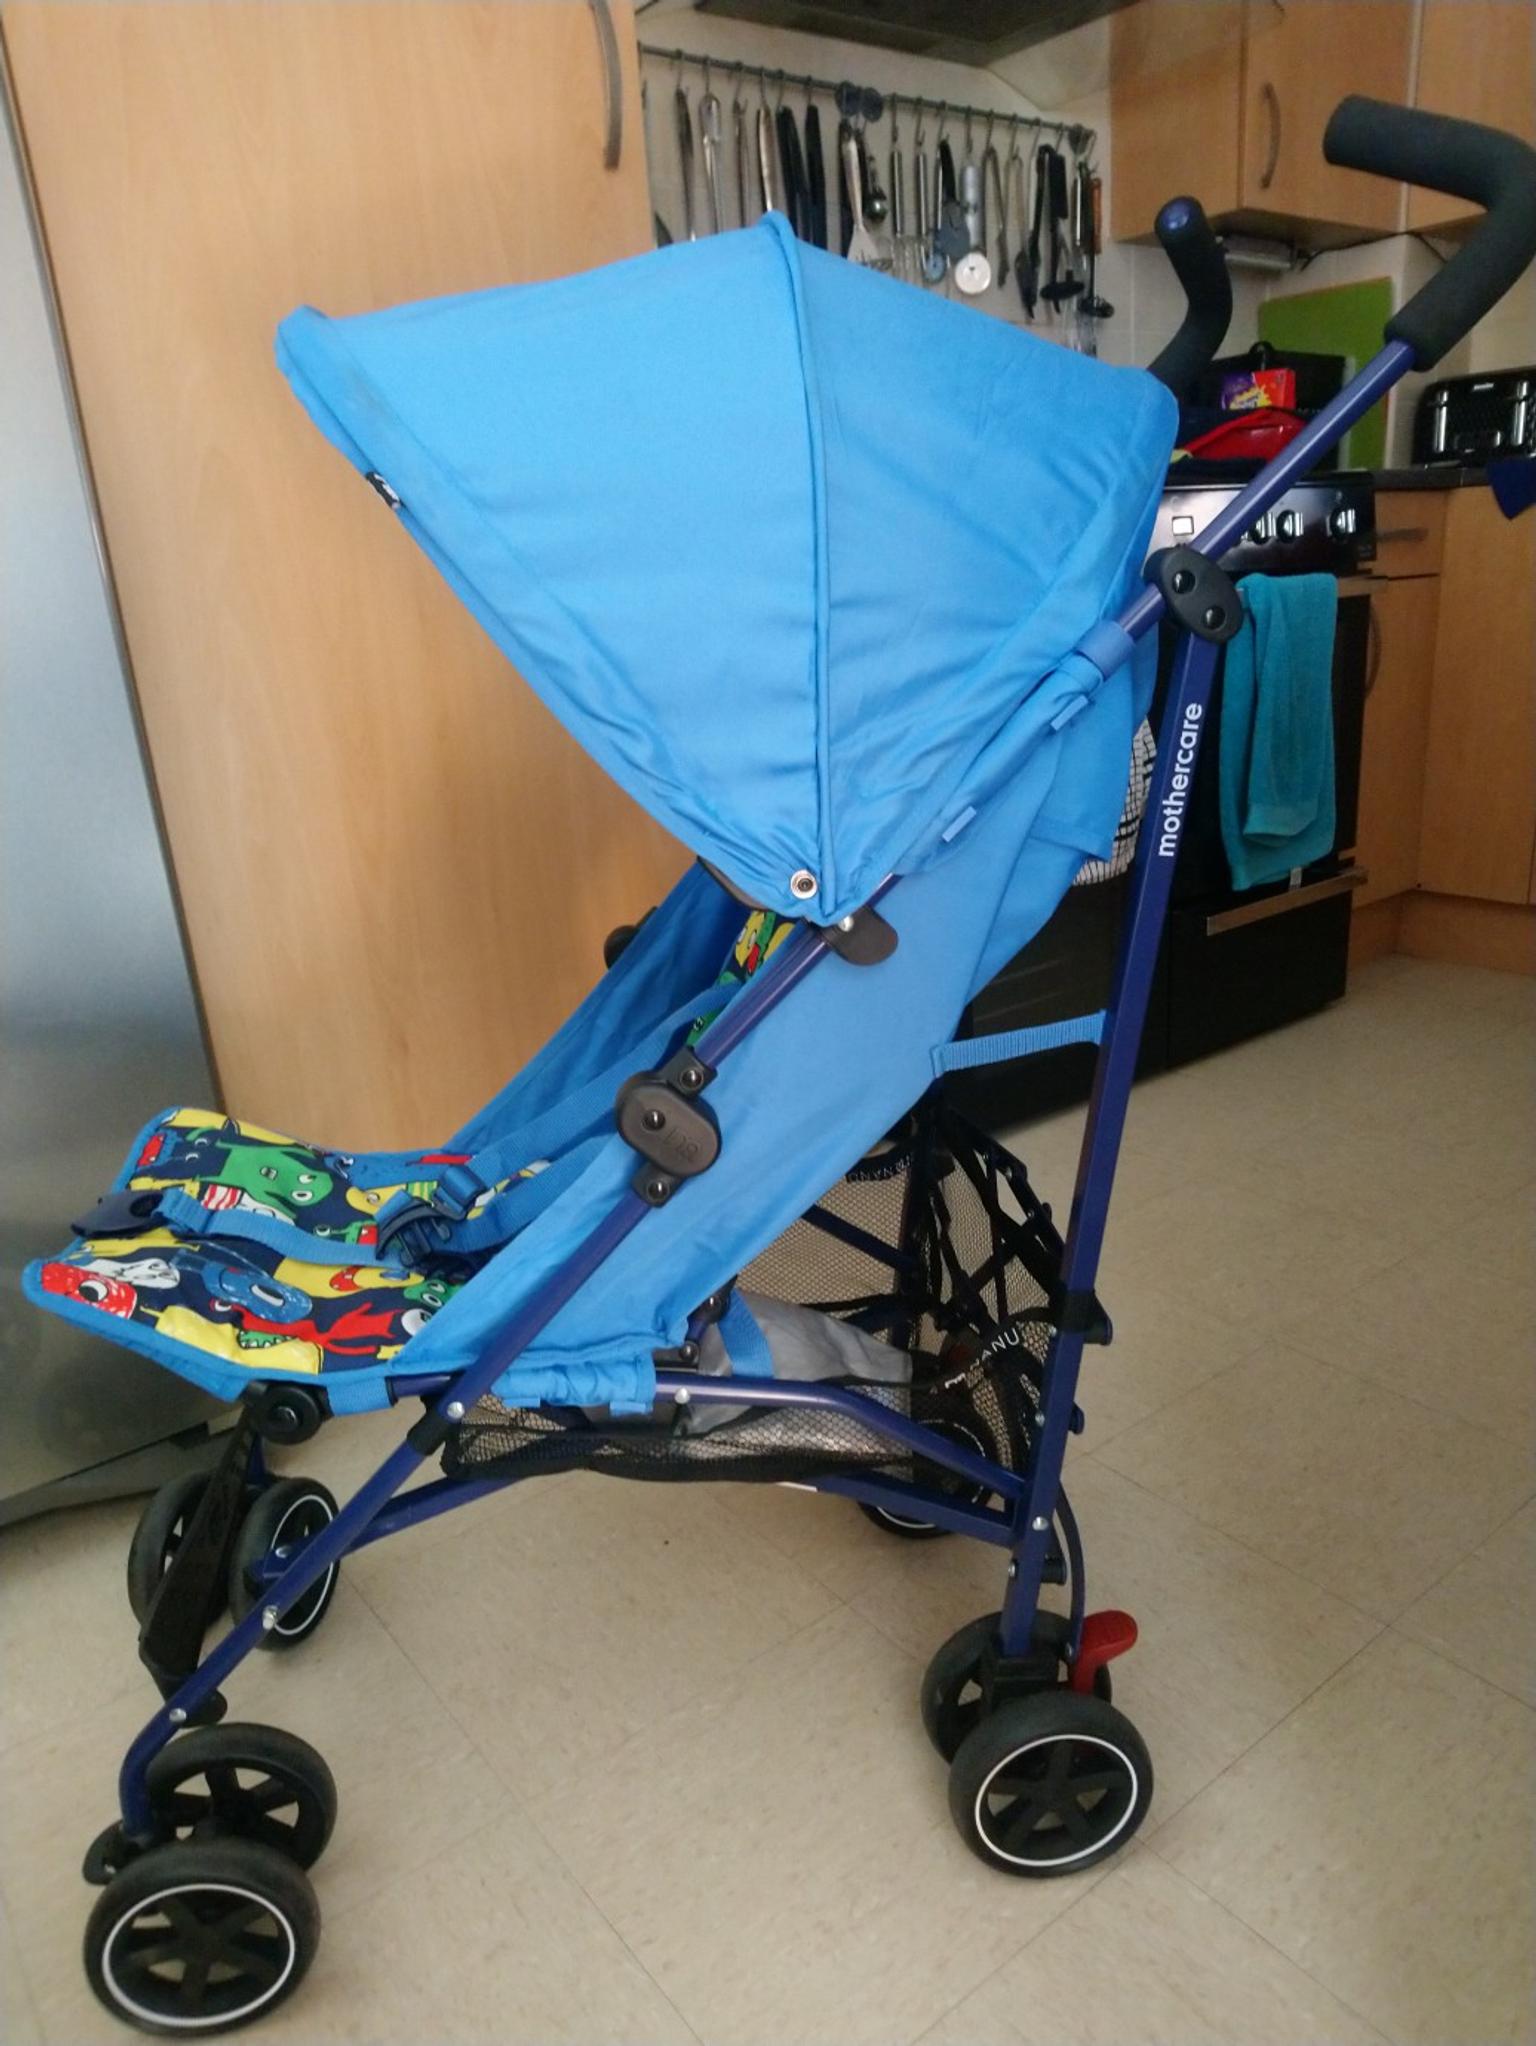 how to fold mothercare nanu stroller